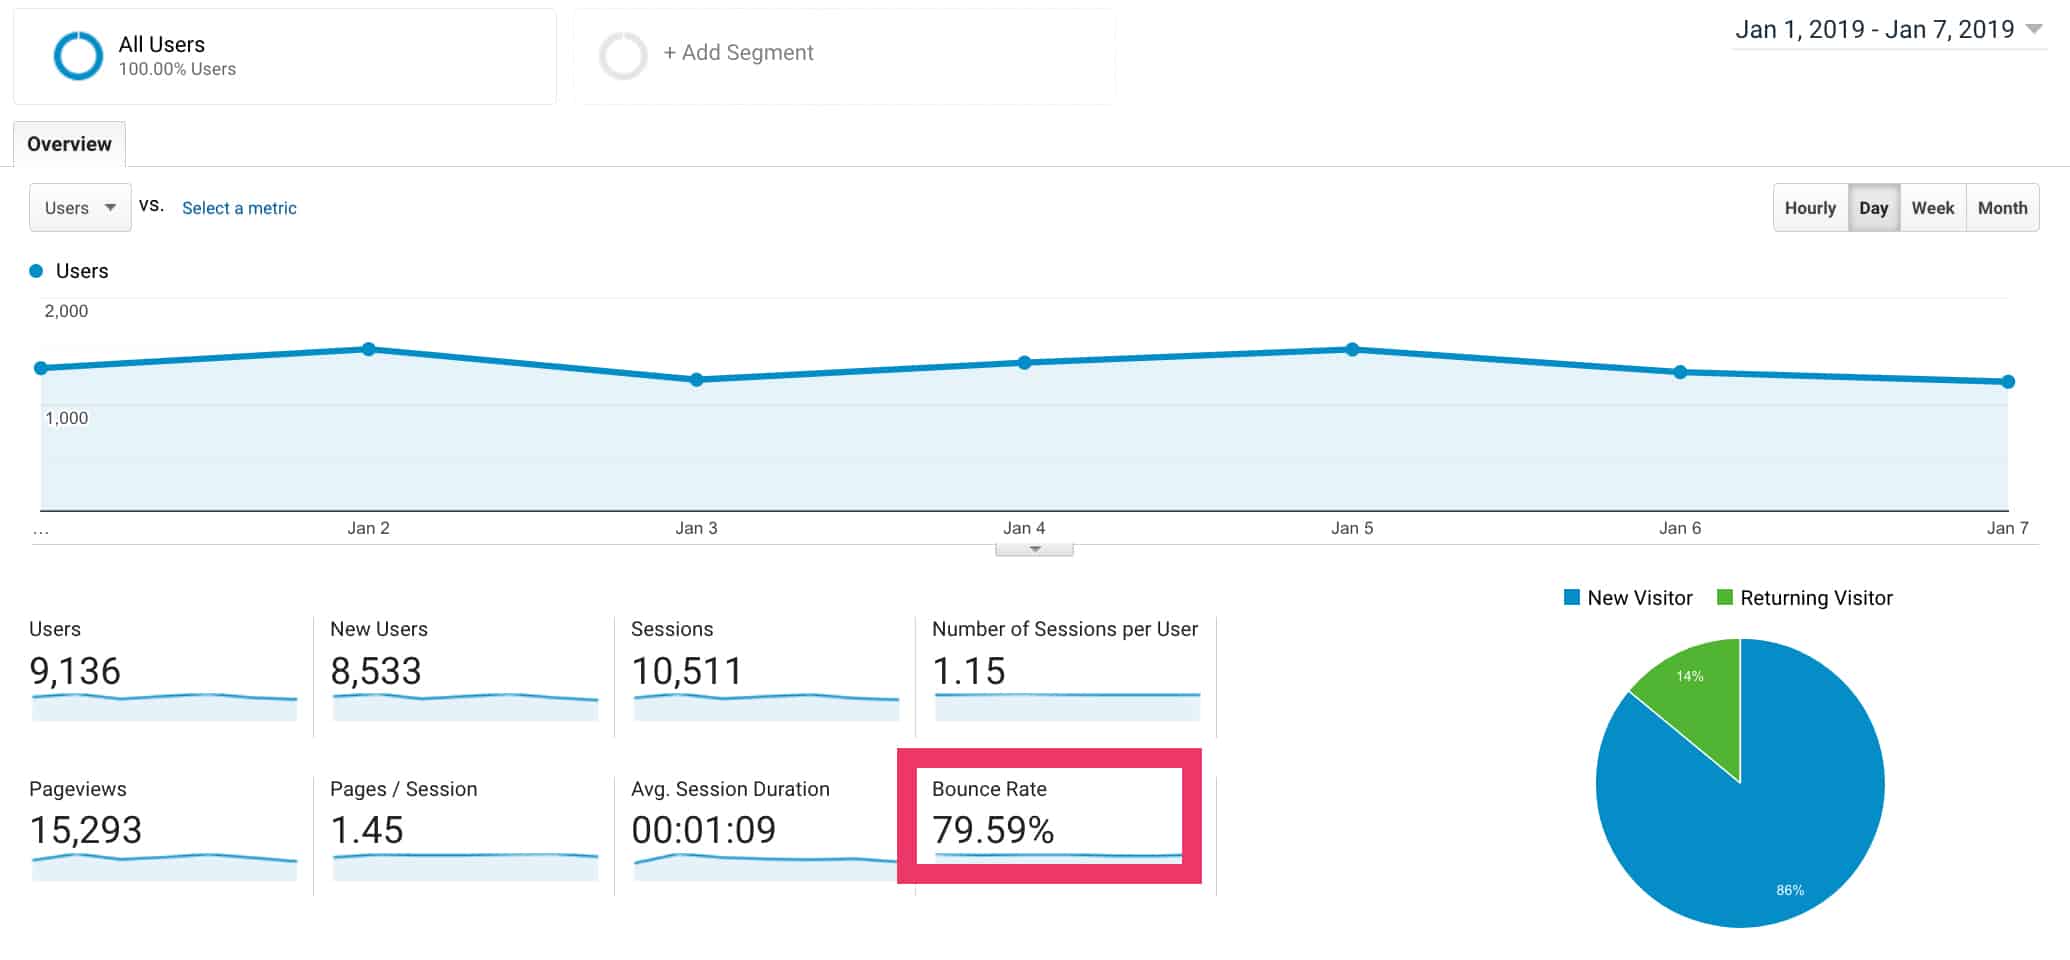 By using Google Analytics, you can view your Bounce Rate in Audience > Overview.